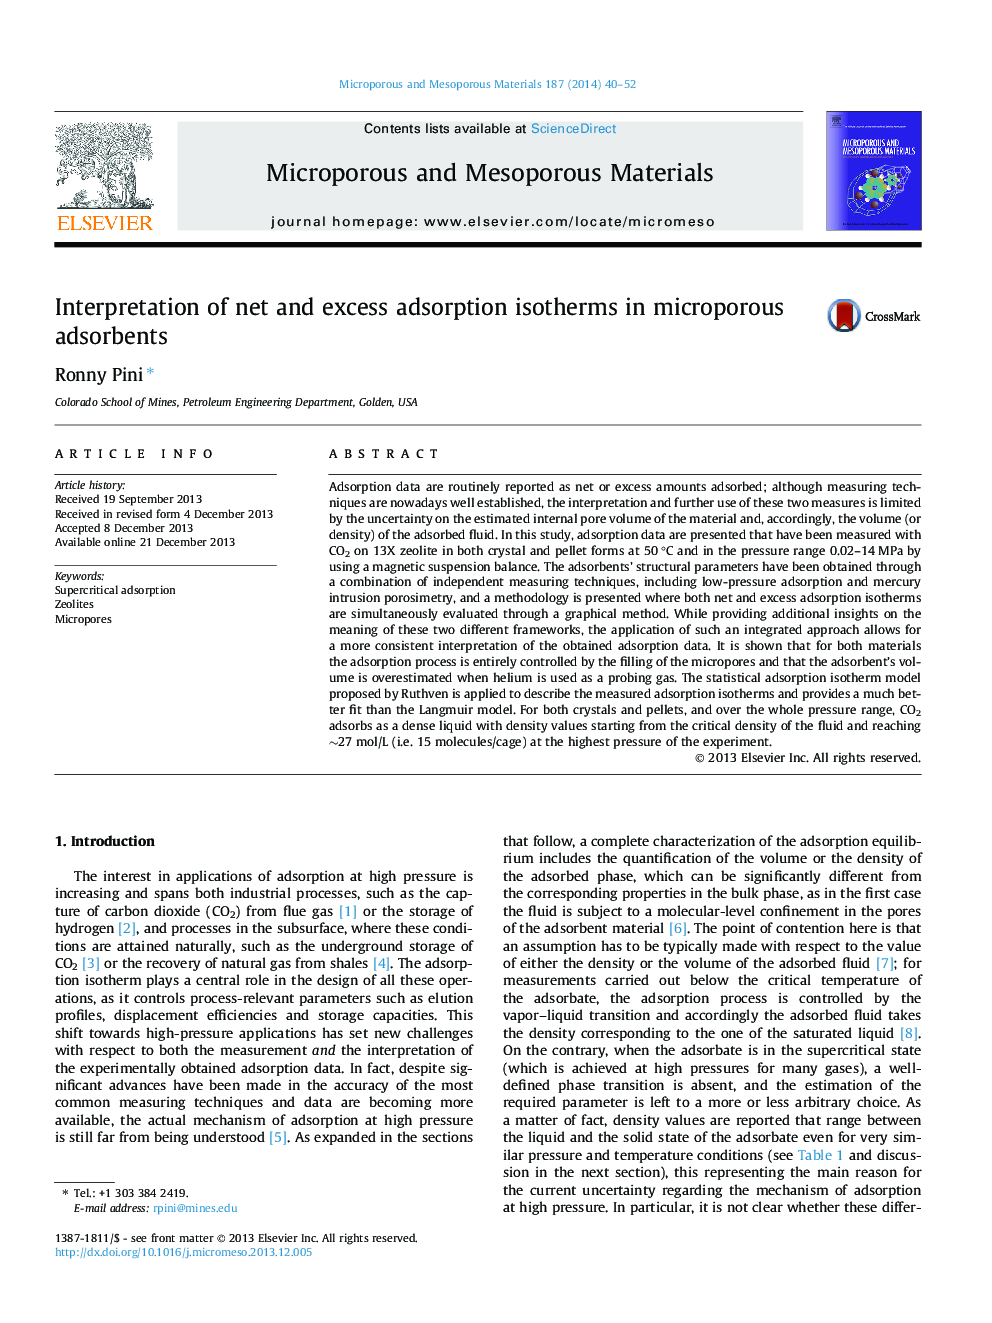 Interpretation of net and excess adsorption isotherms in microporous adsorbents